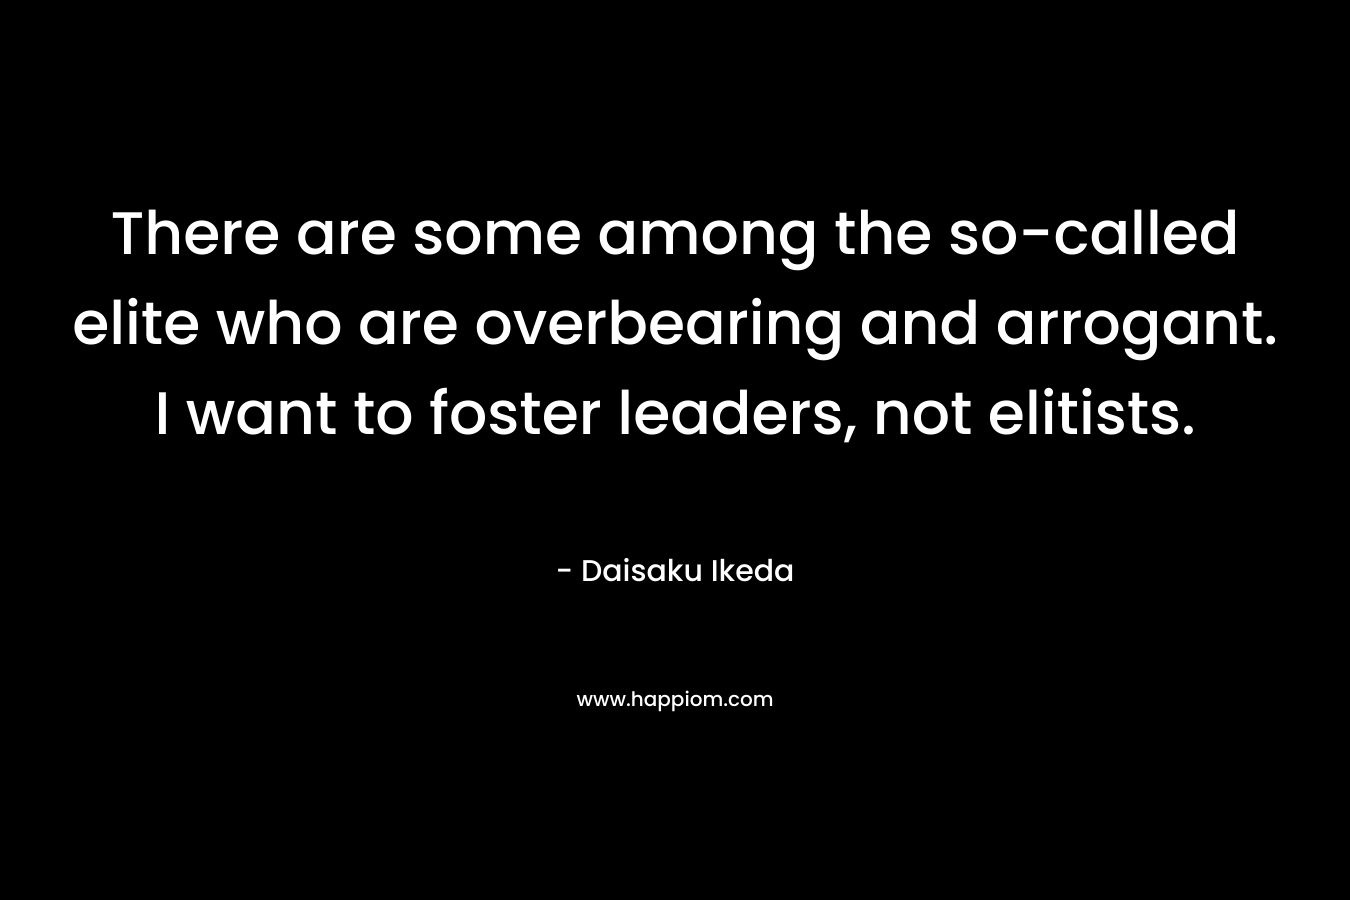 There are some among the so-called elite who are overbearing and arrogant. I want to foster leaders, not elitists. – Daisaku Ikeda